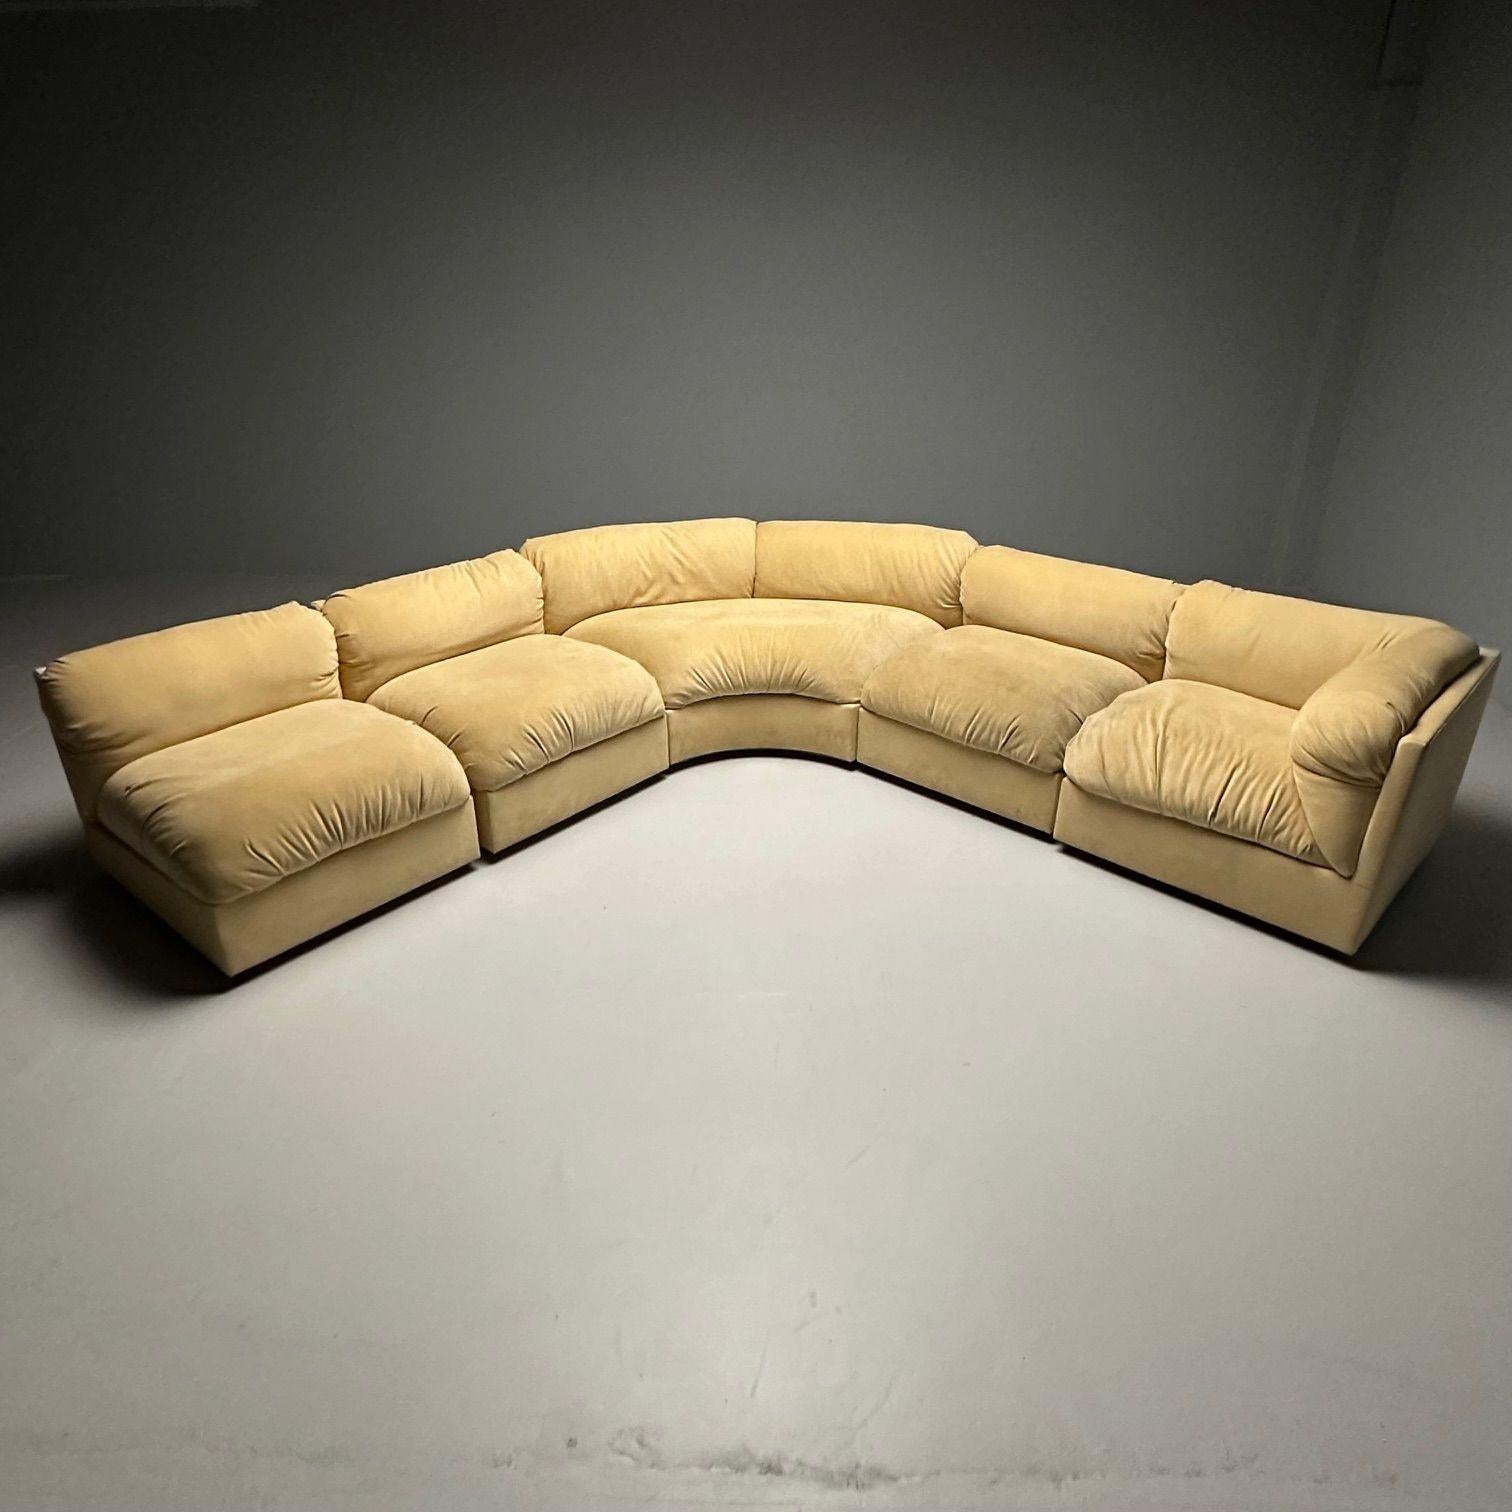 Erwin-Lambeth, Mid-Century Modern, Large Modular Sectional Sofa, Re-upholstery For Sale 3